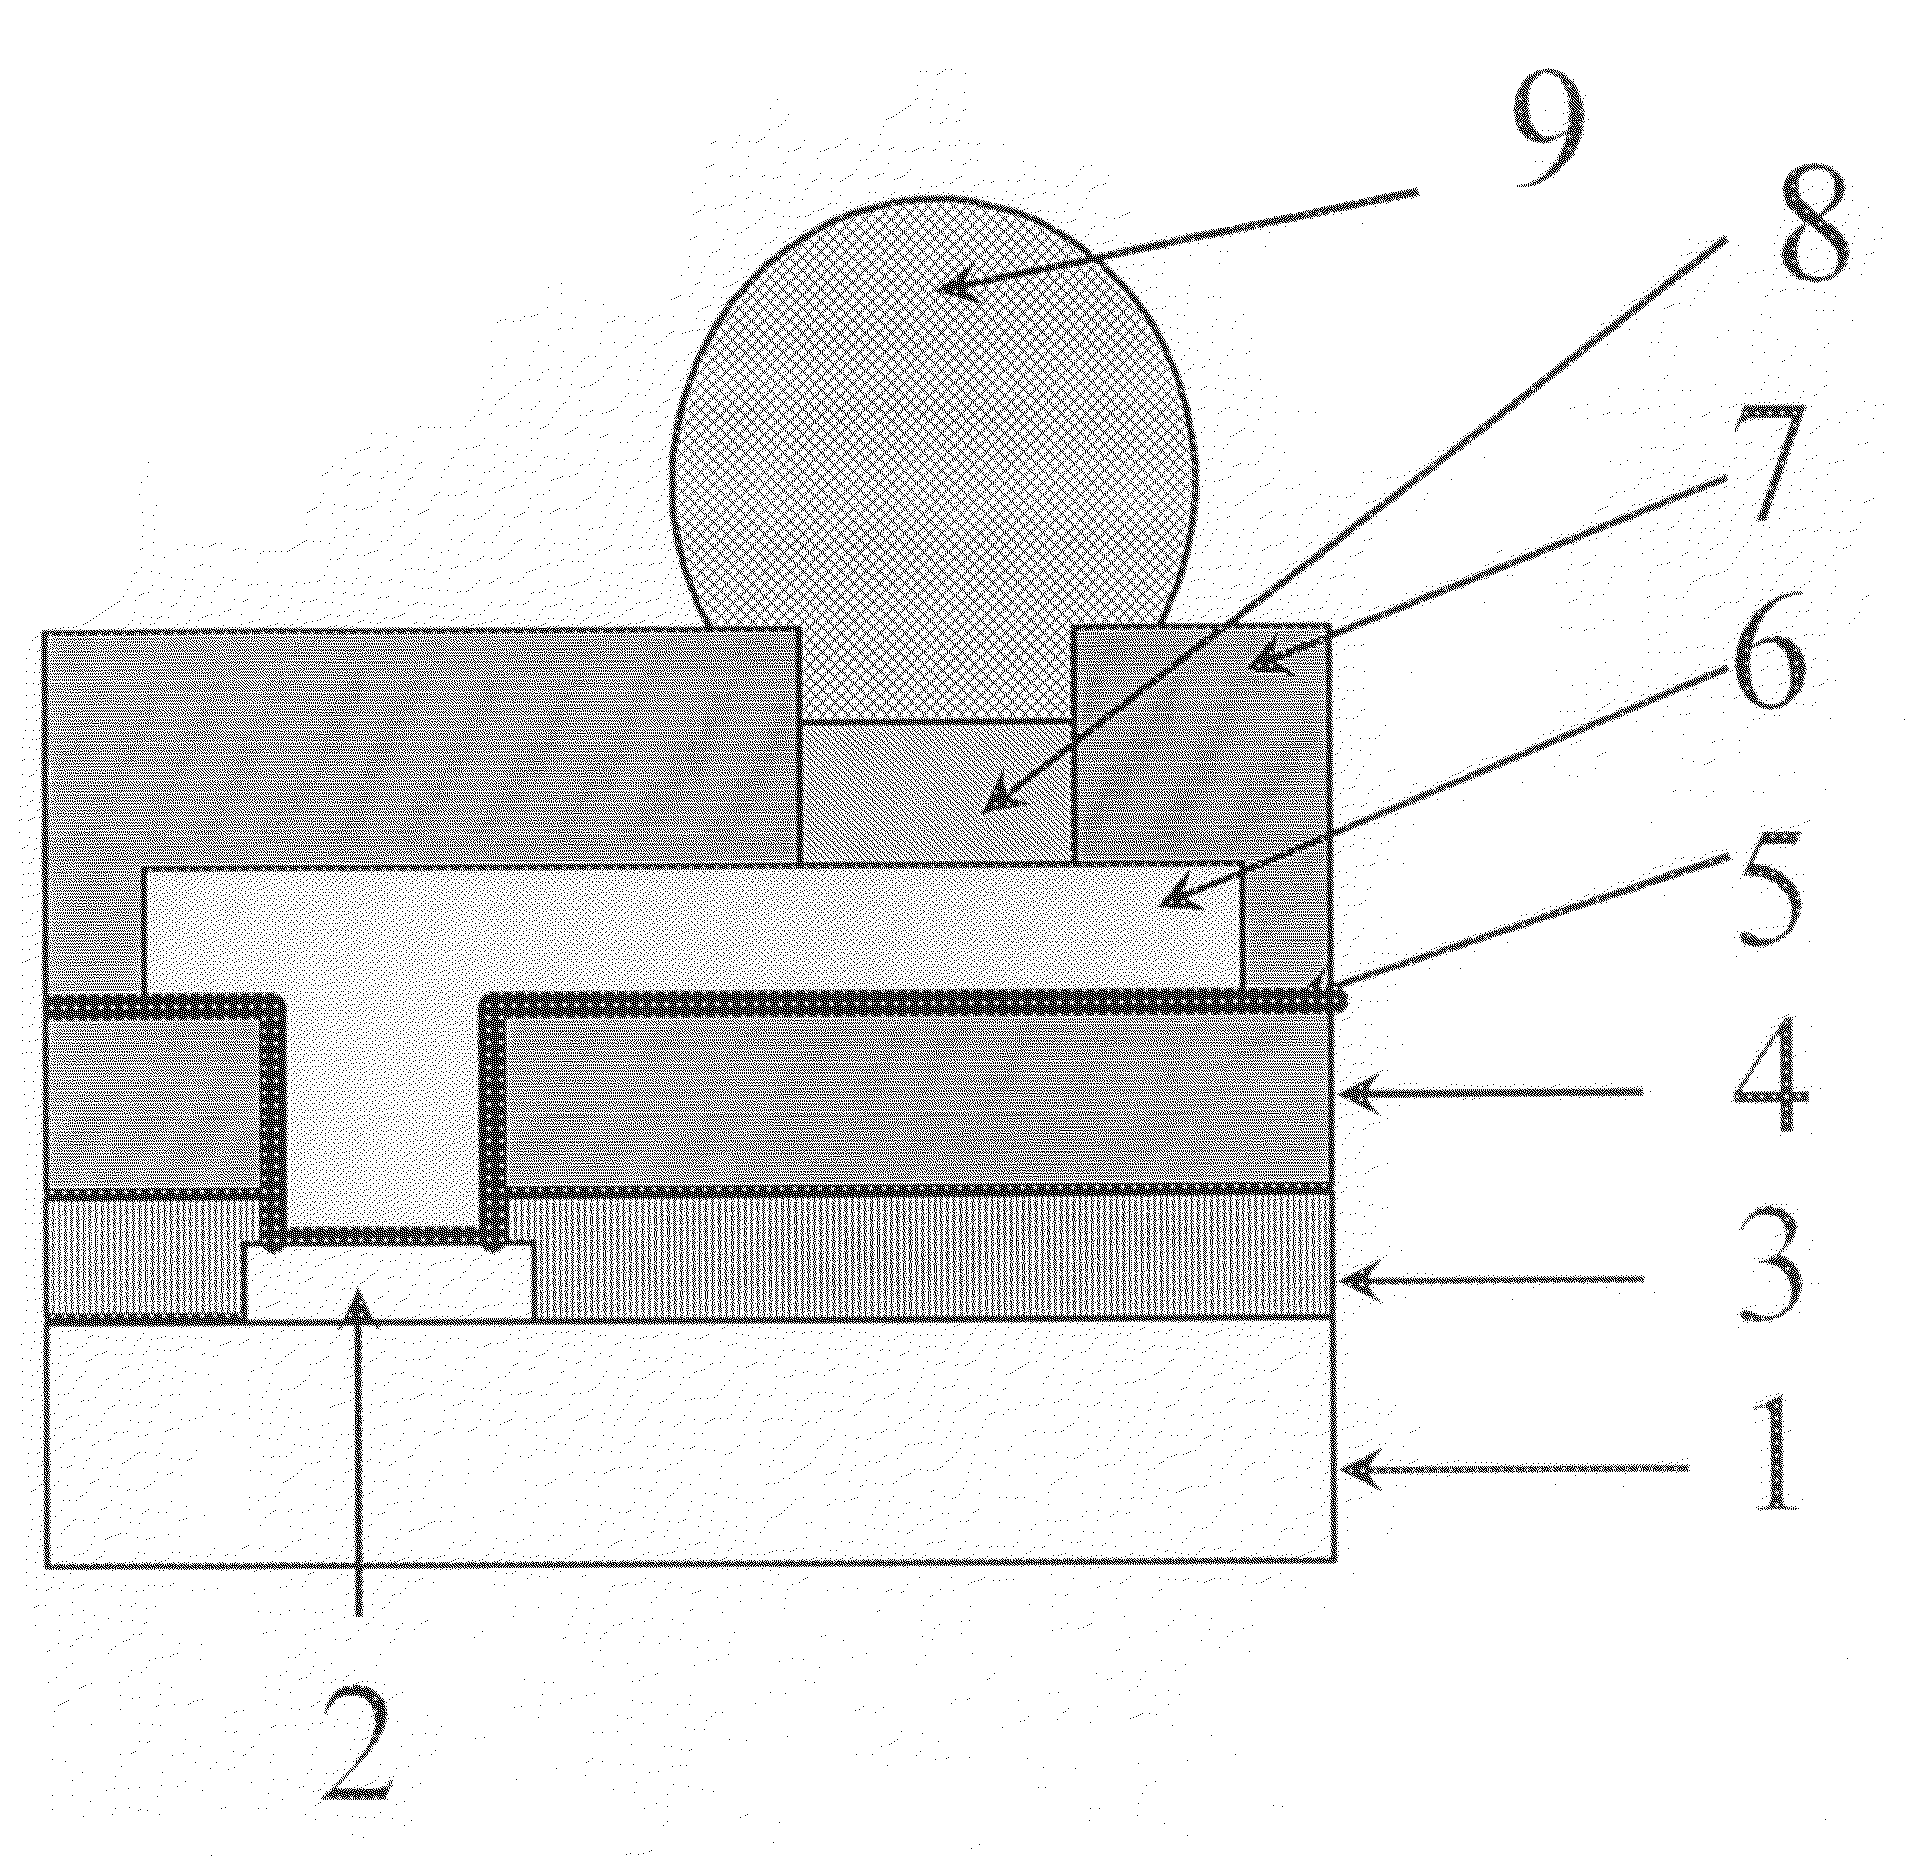 Positive Photosensitive Resin Composition, and Semiconductor Device and Display Therewith